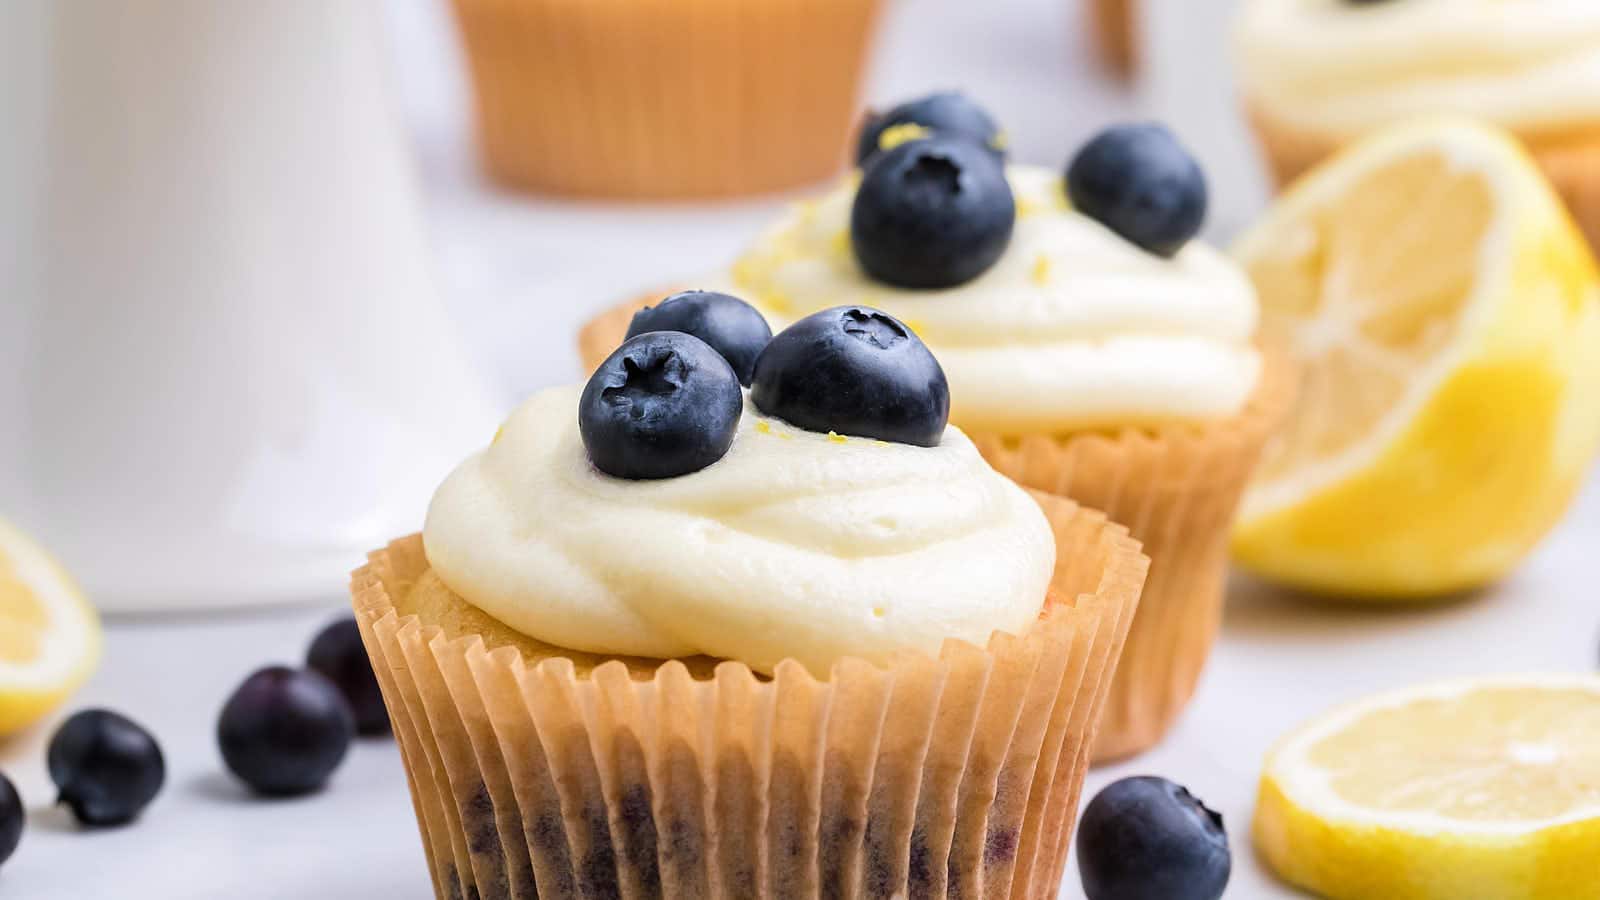 Lemon Blueberry Cupcakes recipe by Cheerful Cook.